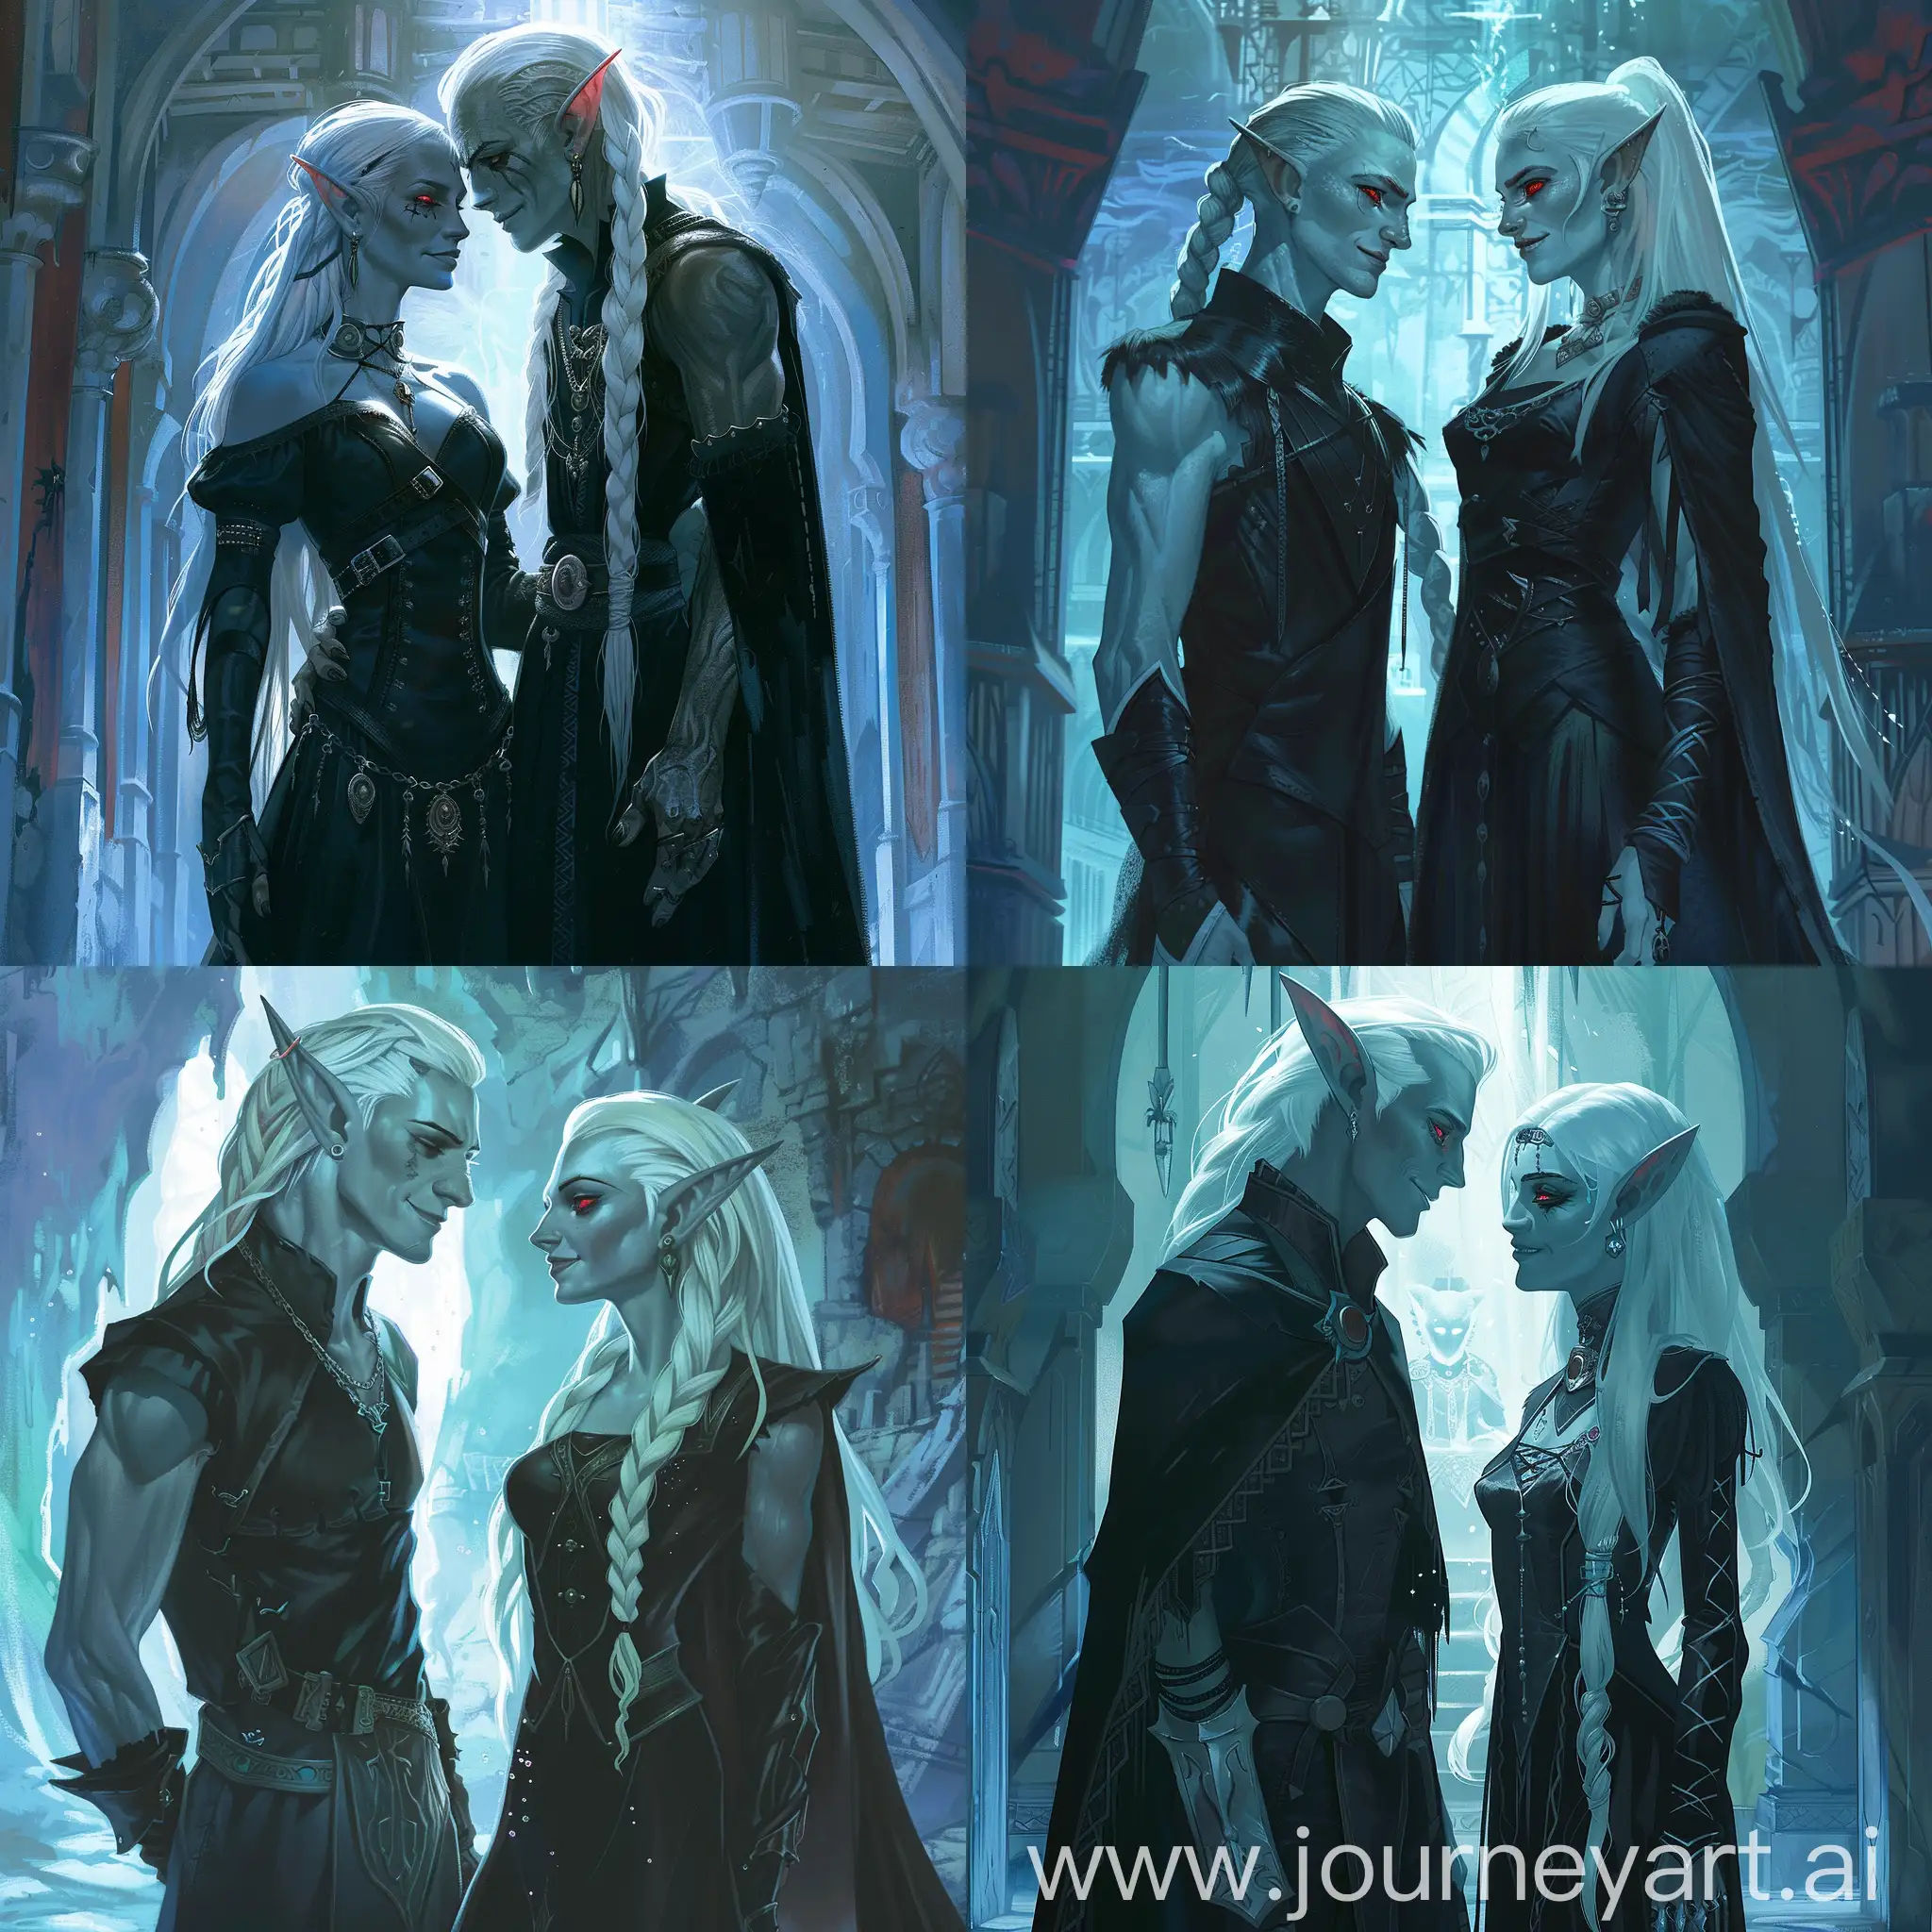 Drow-Rogue-Siblings-in-Enchanted-Underground-Temple